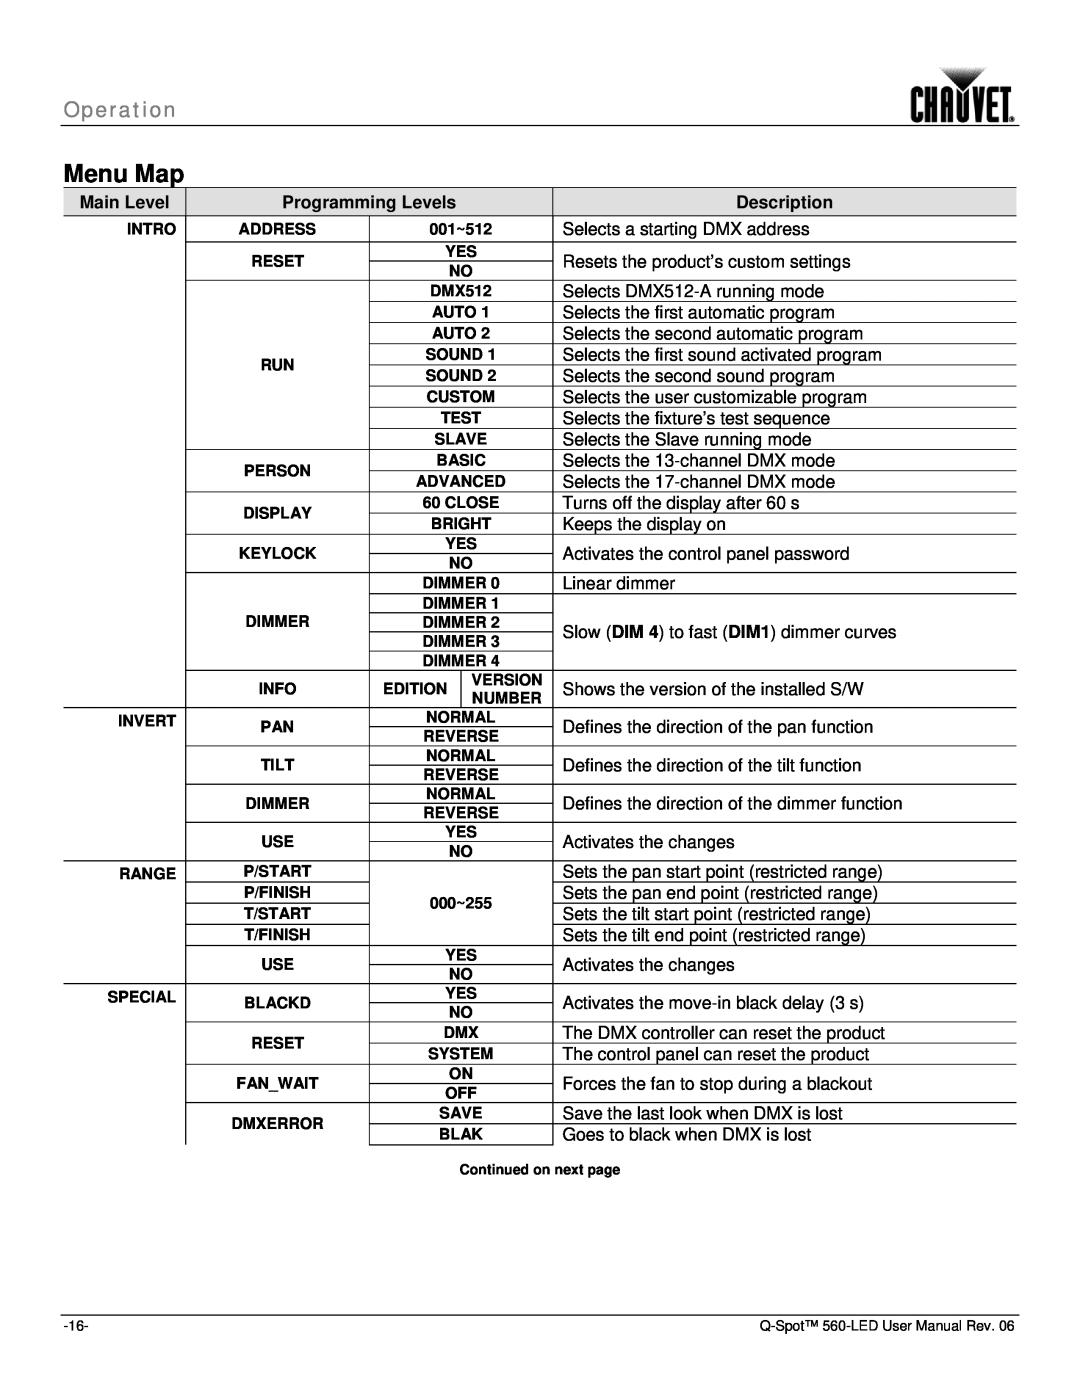 Chauvet 560 user manual Menu Map, Operation, 001~512, 000~255, Continued on next page 